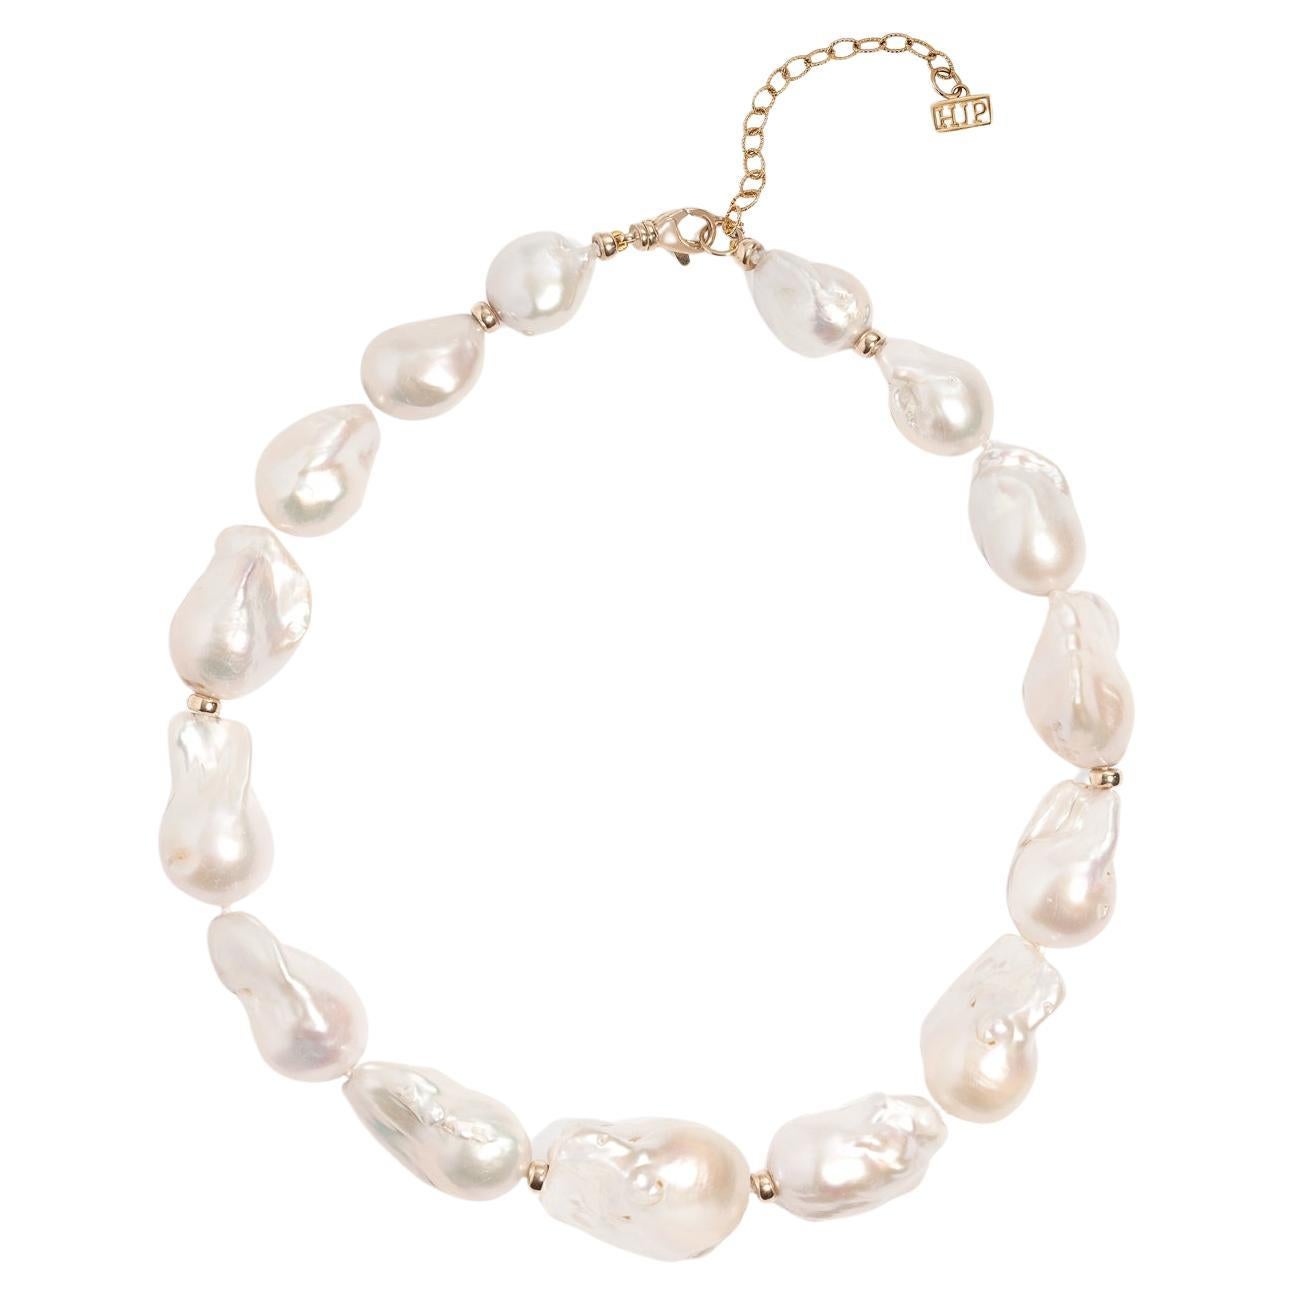 Statement Baroque pearl necklace 14 karat yellow gold by Hi June Parker For Sale